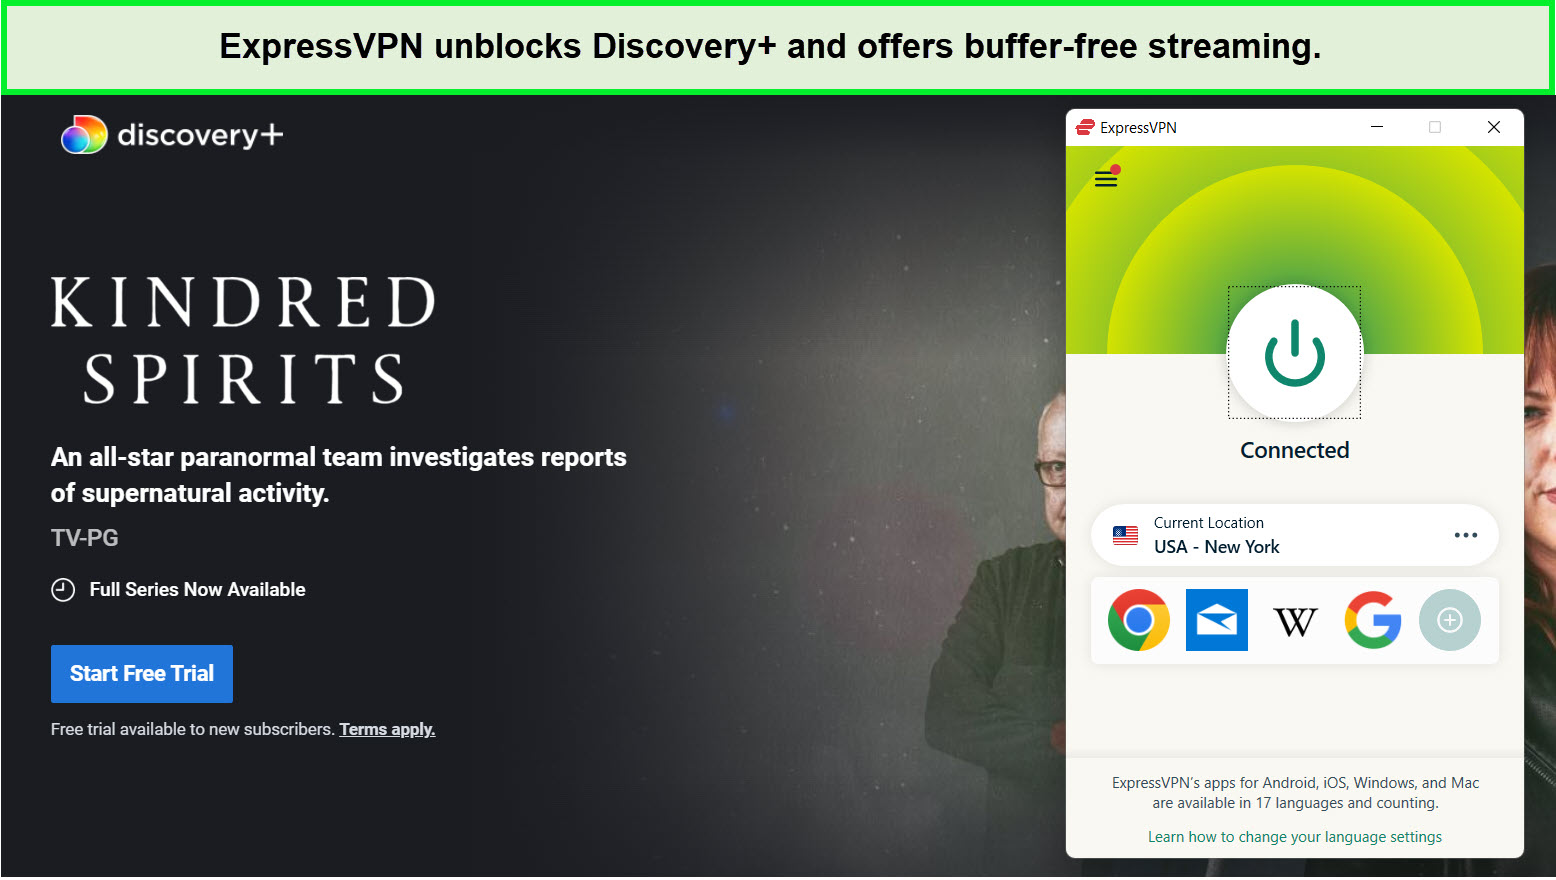 expressvpn-unblocks-kindred-spirits-s7-on-discovery-plus